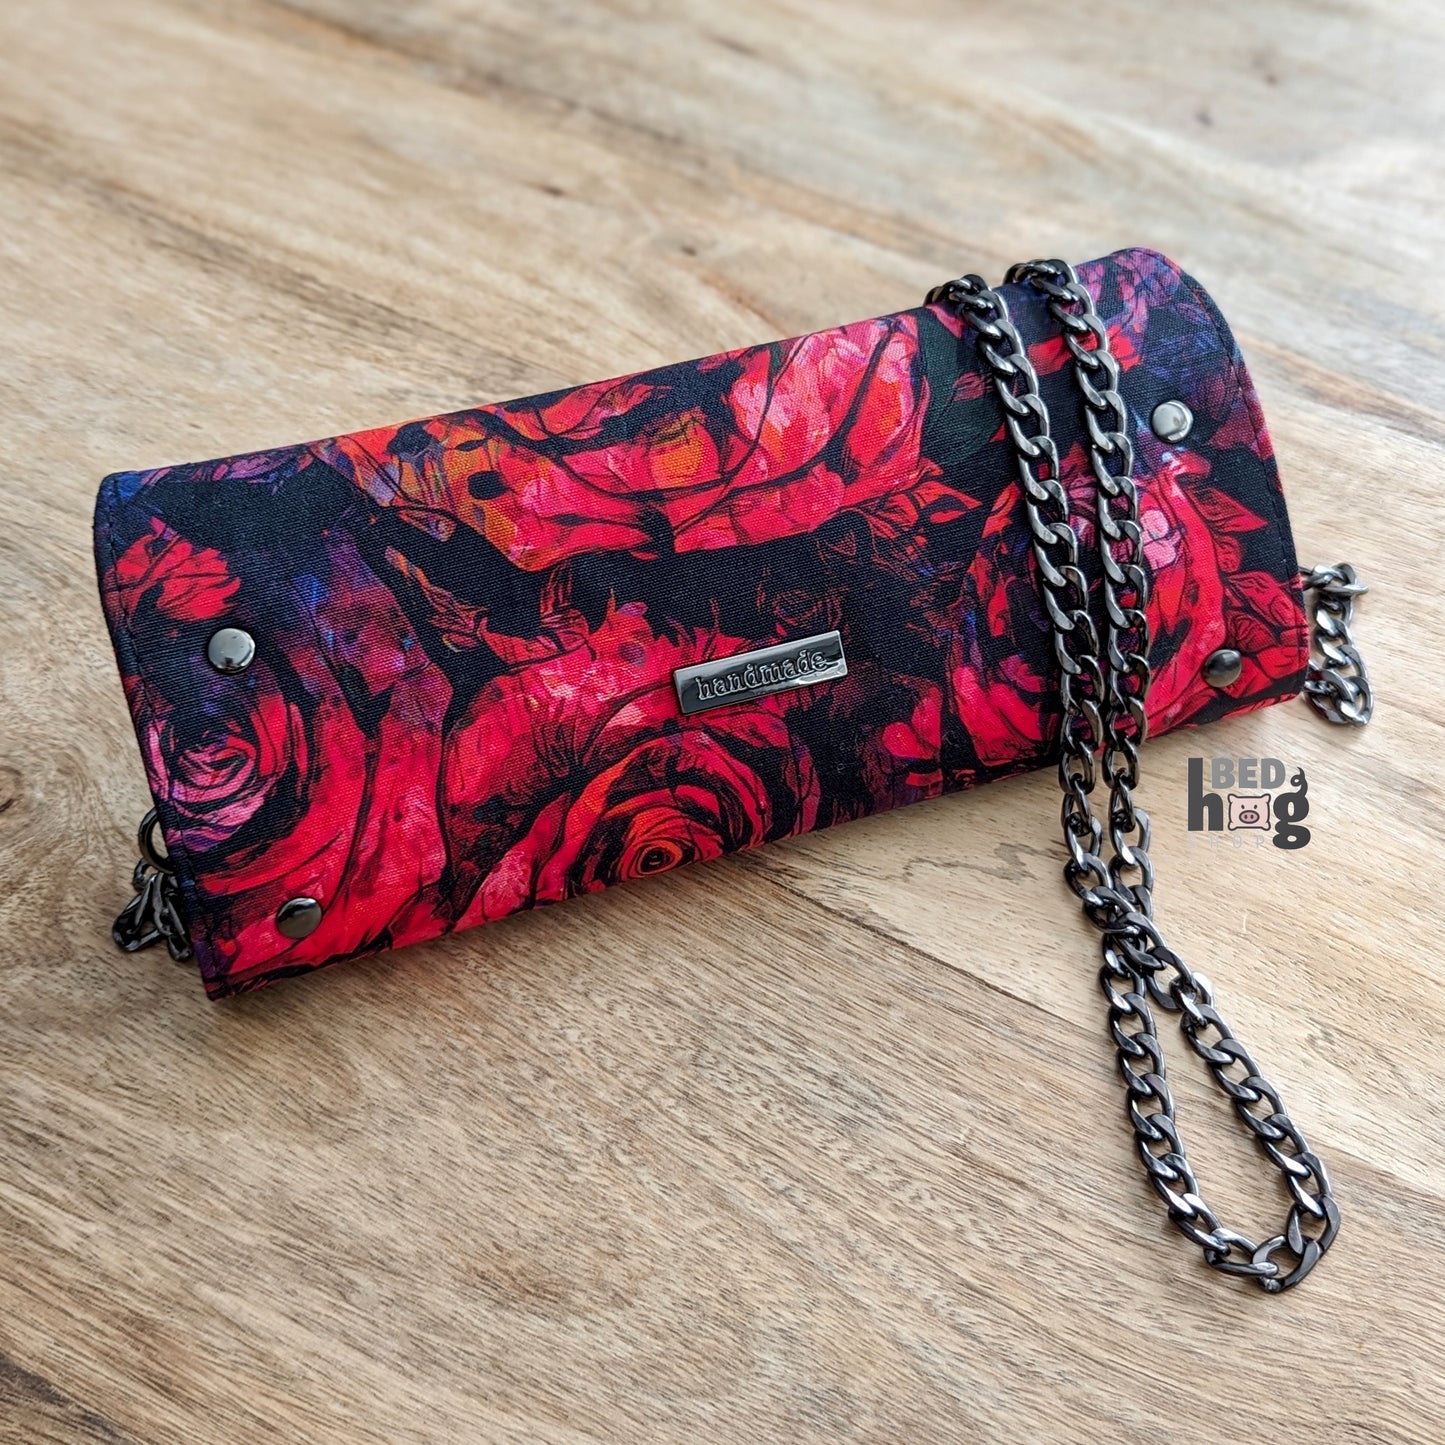 Blood Roses Clutch